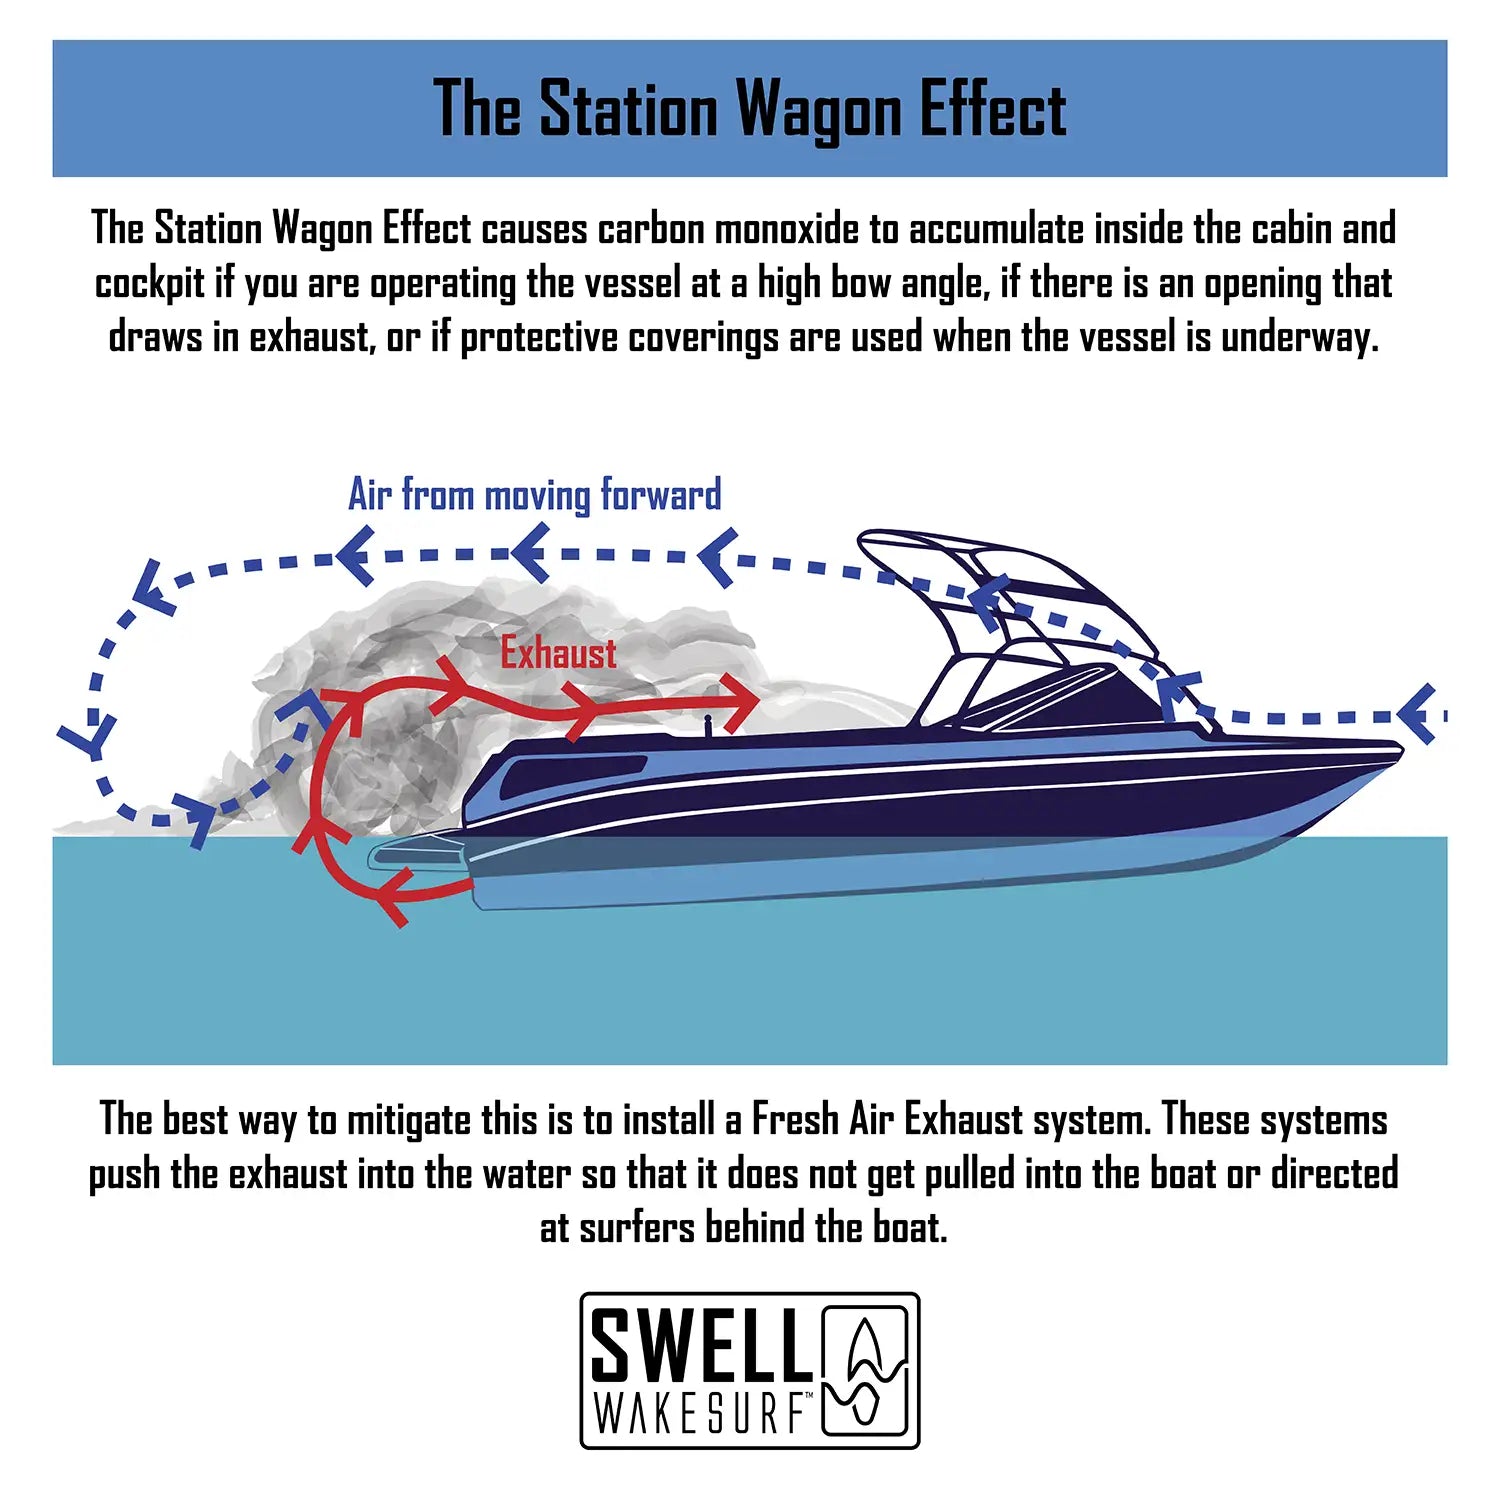 SWELL Wakesurf - Station wagon effects infographic